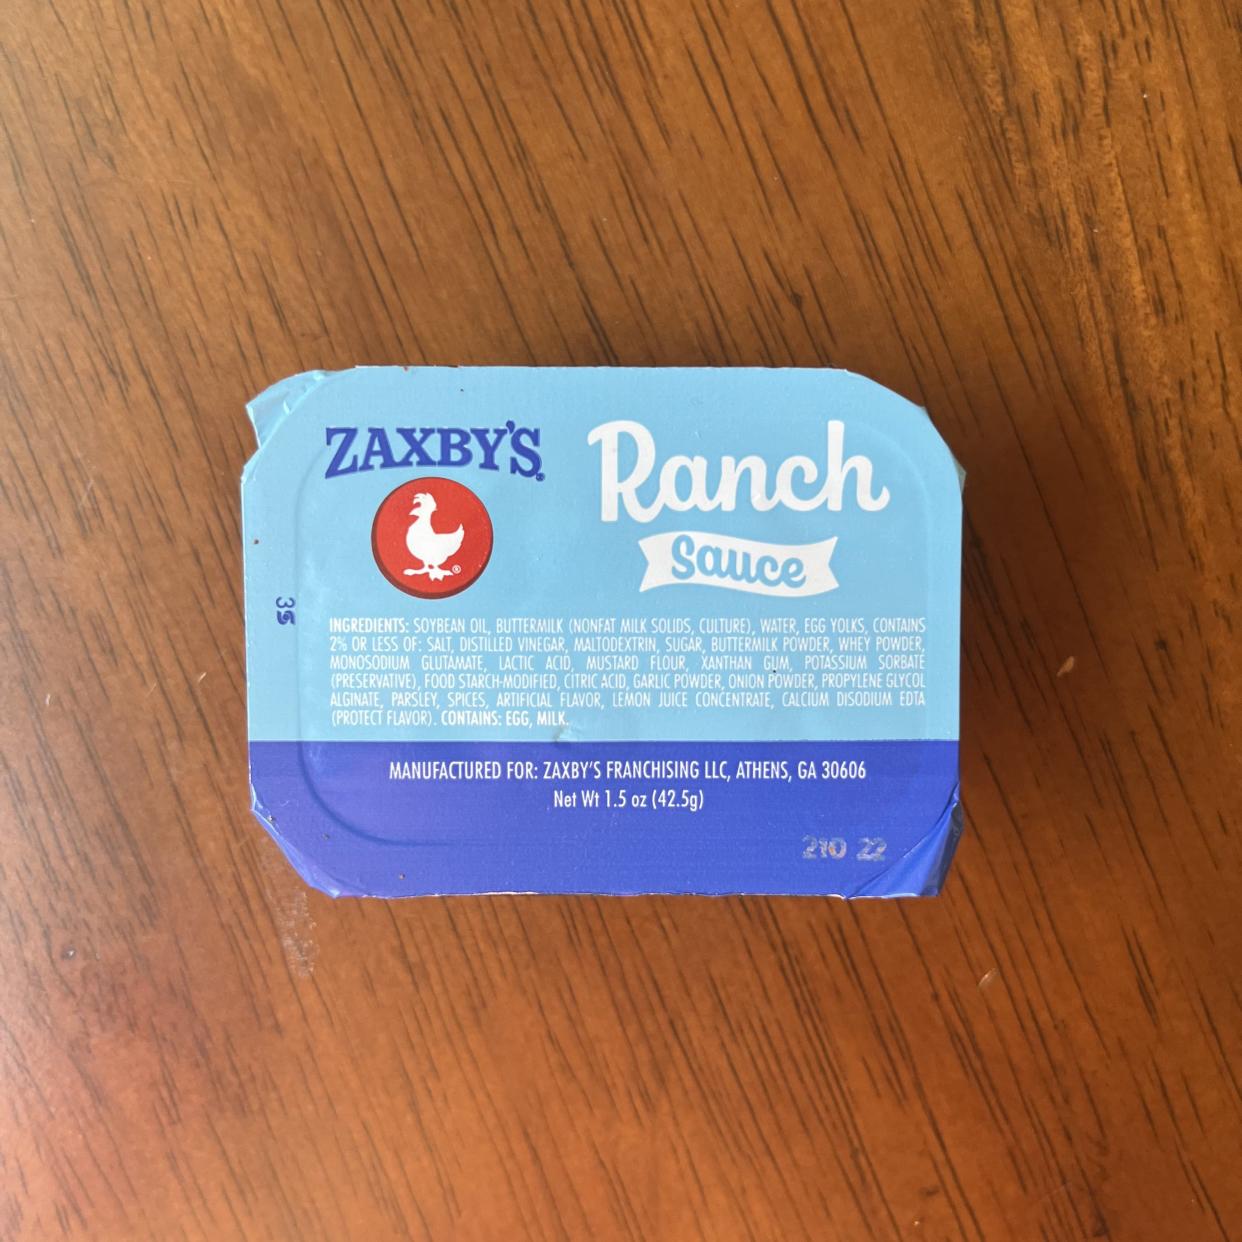 Zaxby's Ranch sauce